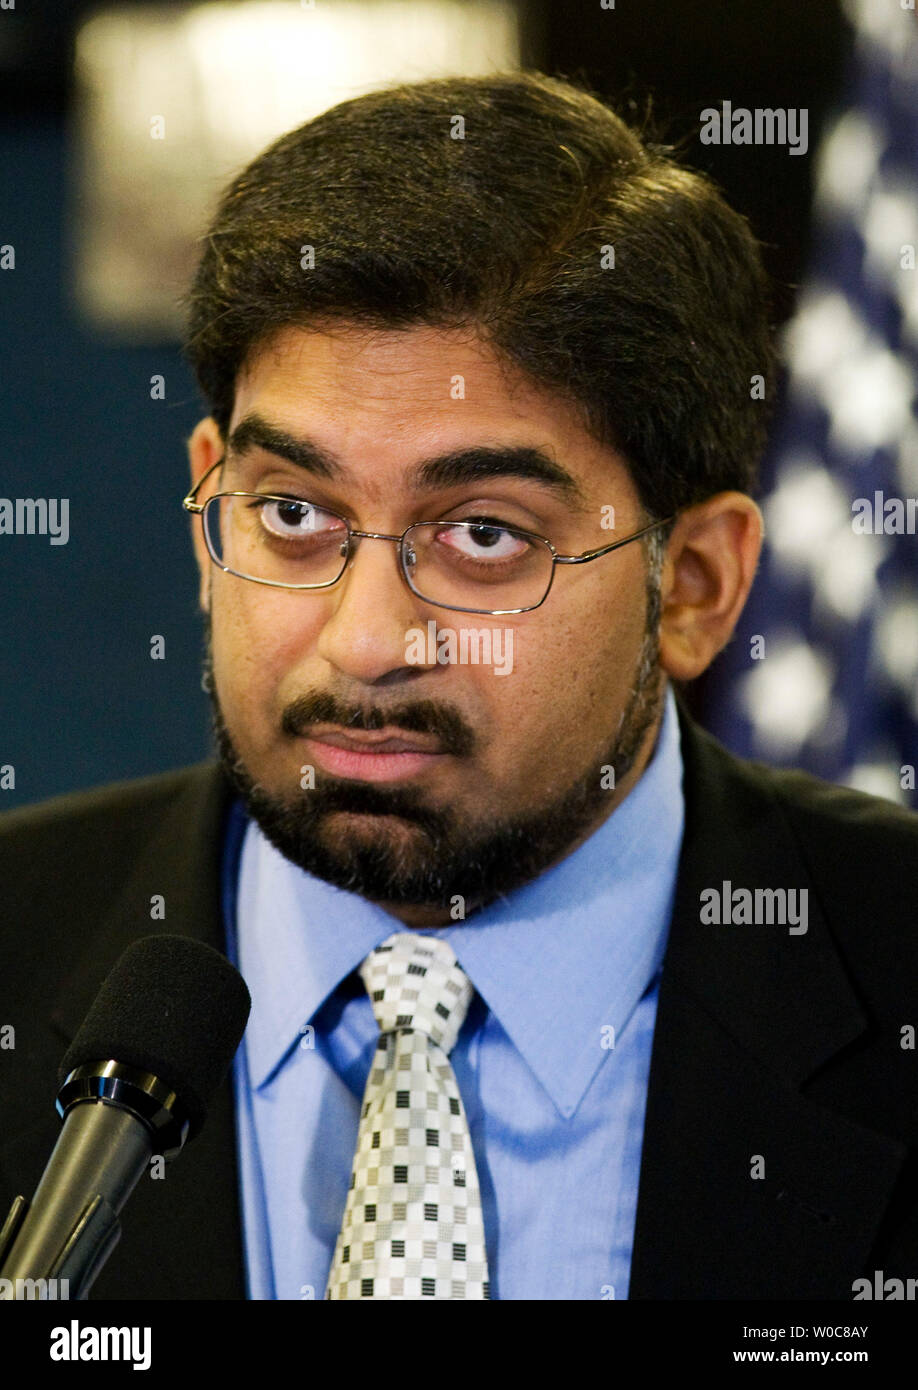 Akif Rahman speaks during a news conference held by the American Civil Liberties Union (ACLU) to mark the one millionth addition to the Transportation Security Administration's terrorist watch list at the National Press Club in Washington on July 14, 2008. Rahman, an American citizen, has been repeatedly detained and interrogated extensively at the U.S.-Canada border while traveling for business. (UPI Photo/Patrick D. McDermott) Stock Photo